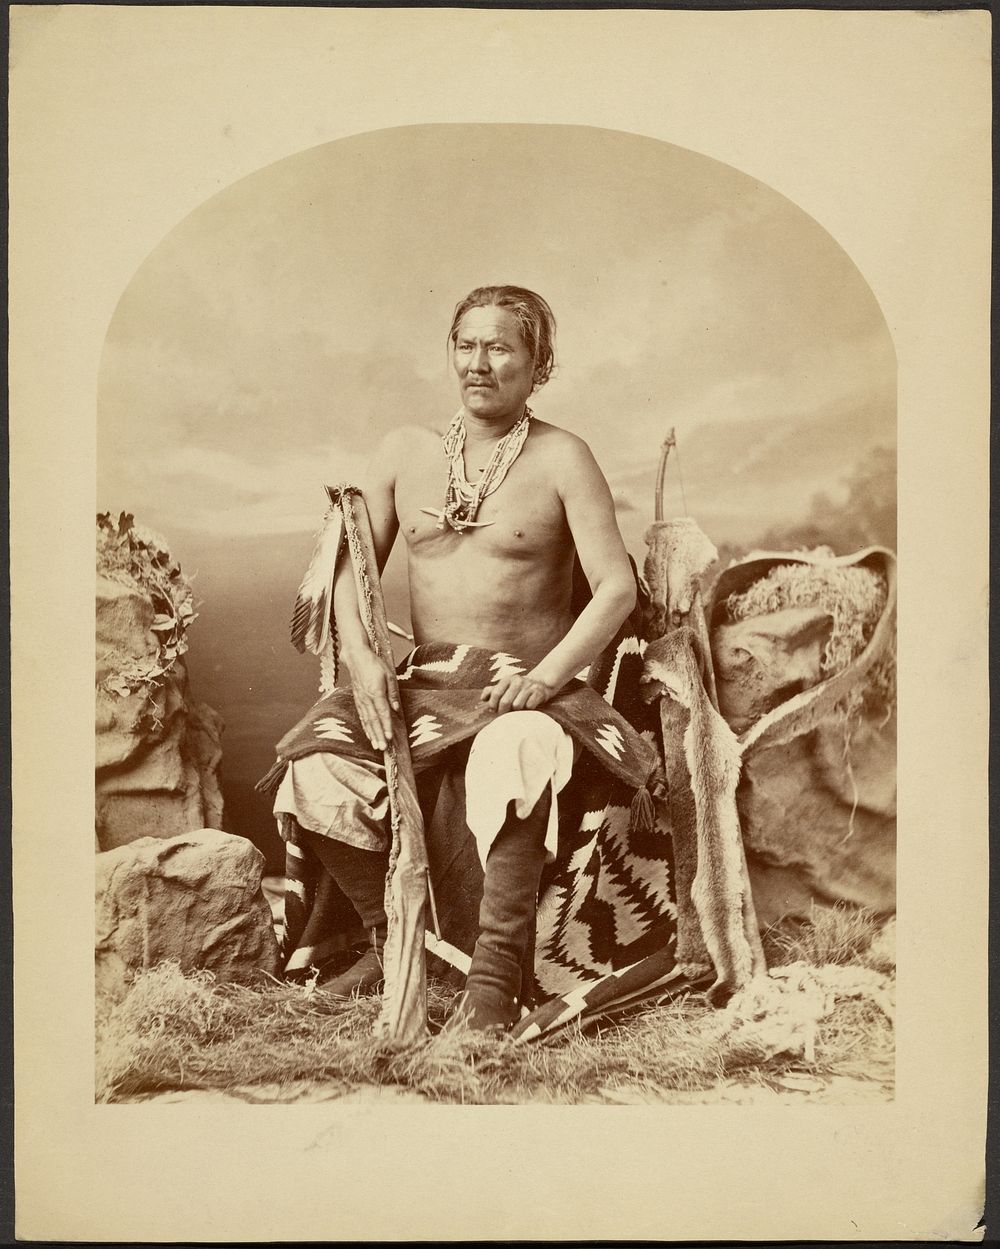 Manulitó, Chief of the Navajos by Charles M Bell